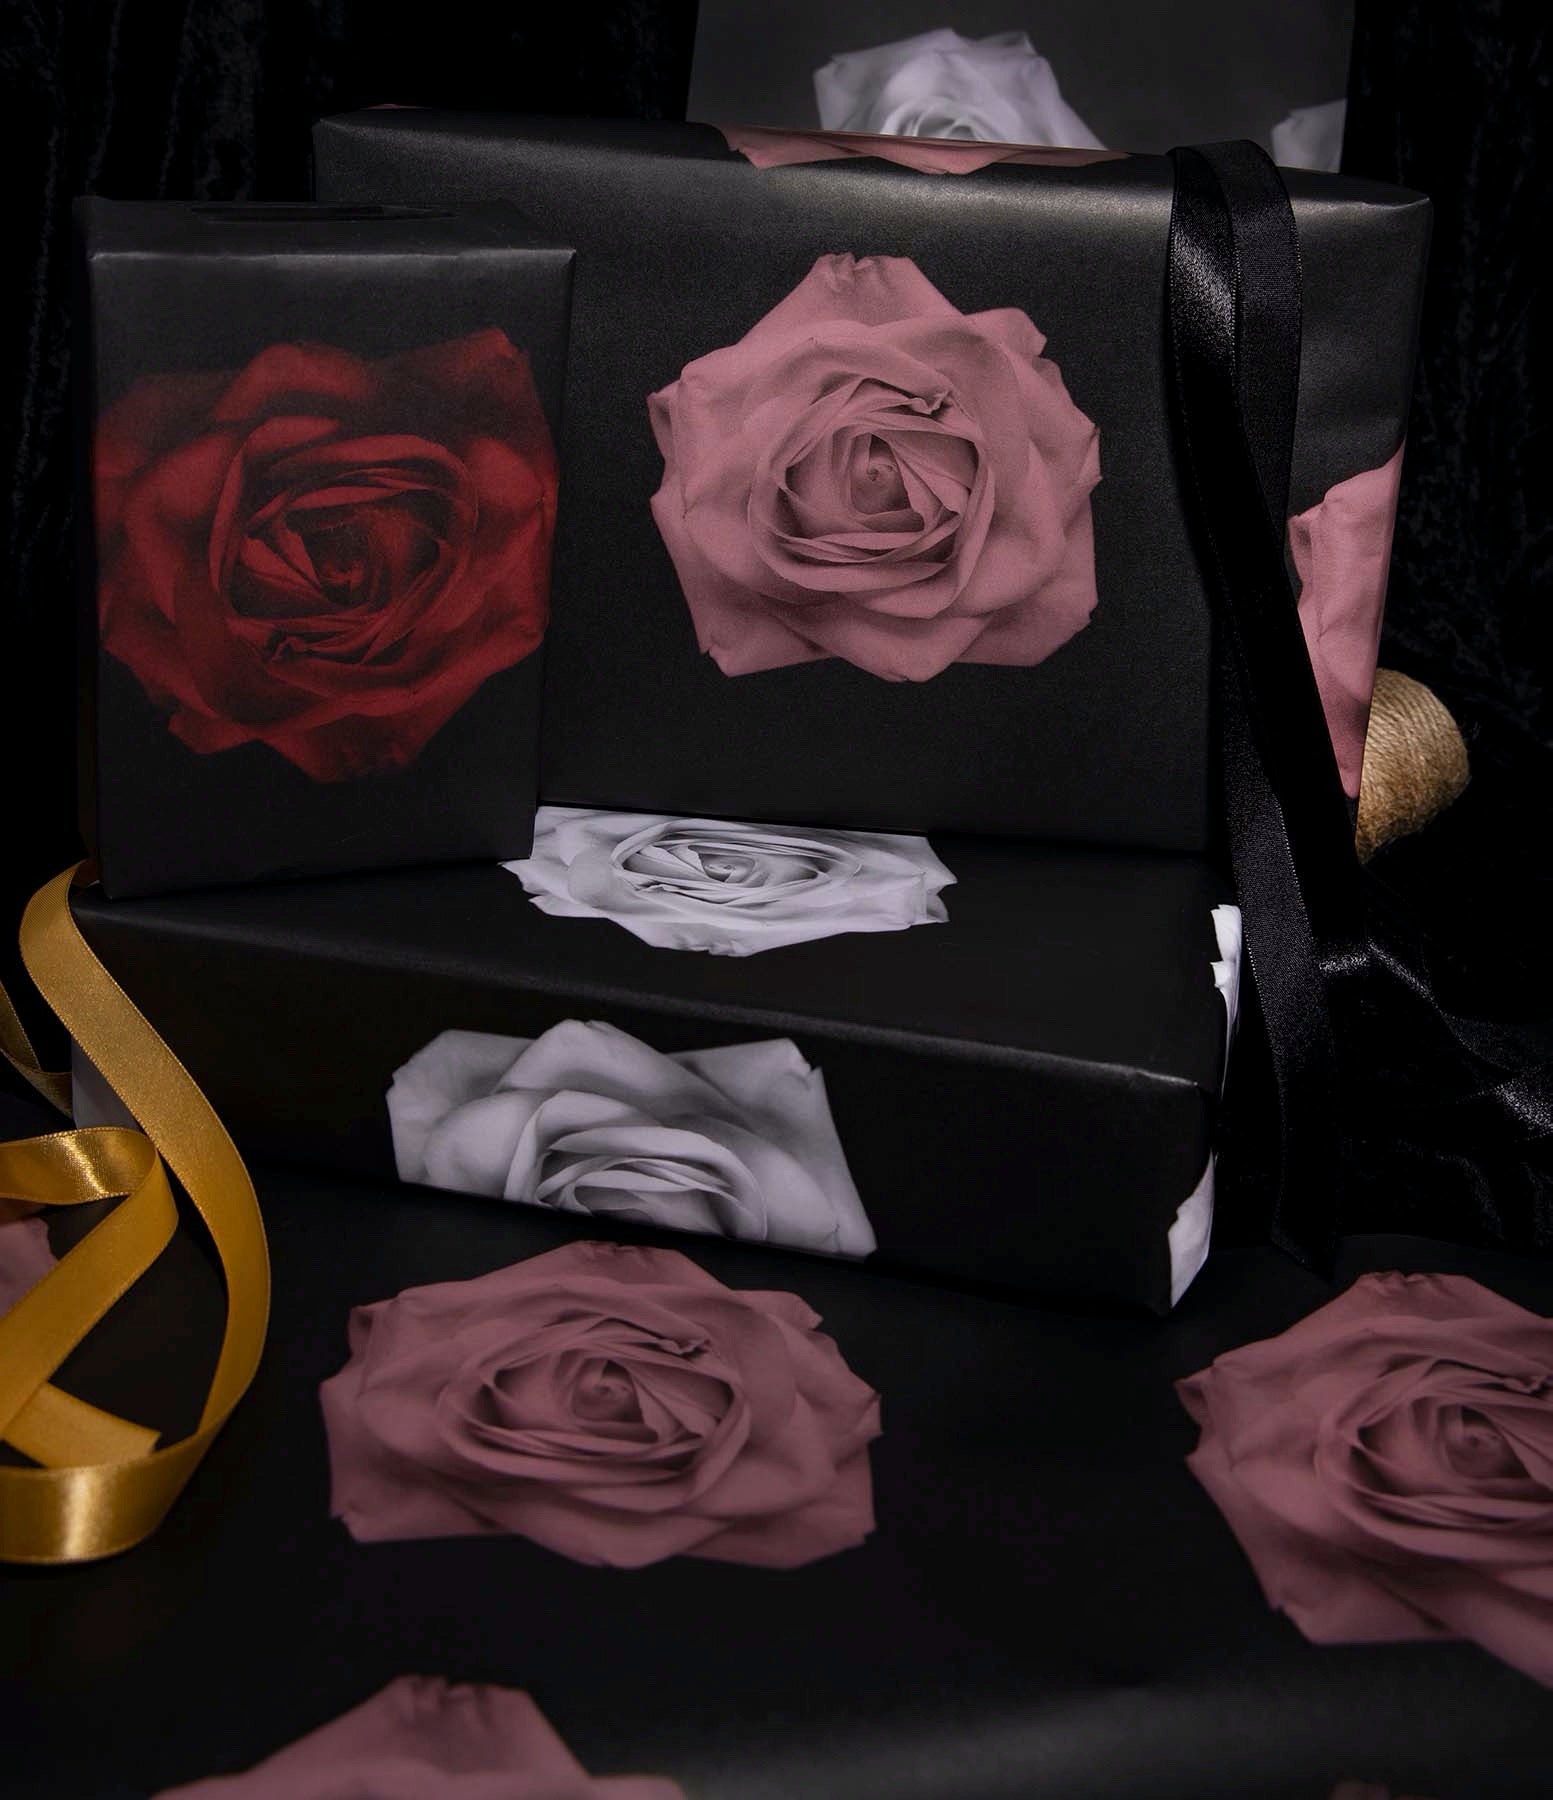 B&W Filmic Rose Noir - Wrapping Paper - Set of 3 Sheets